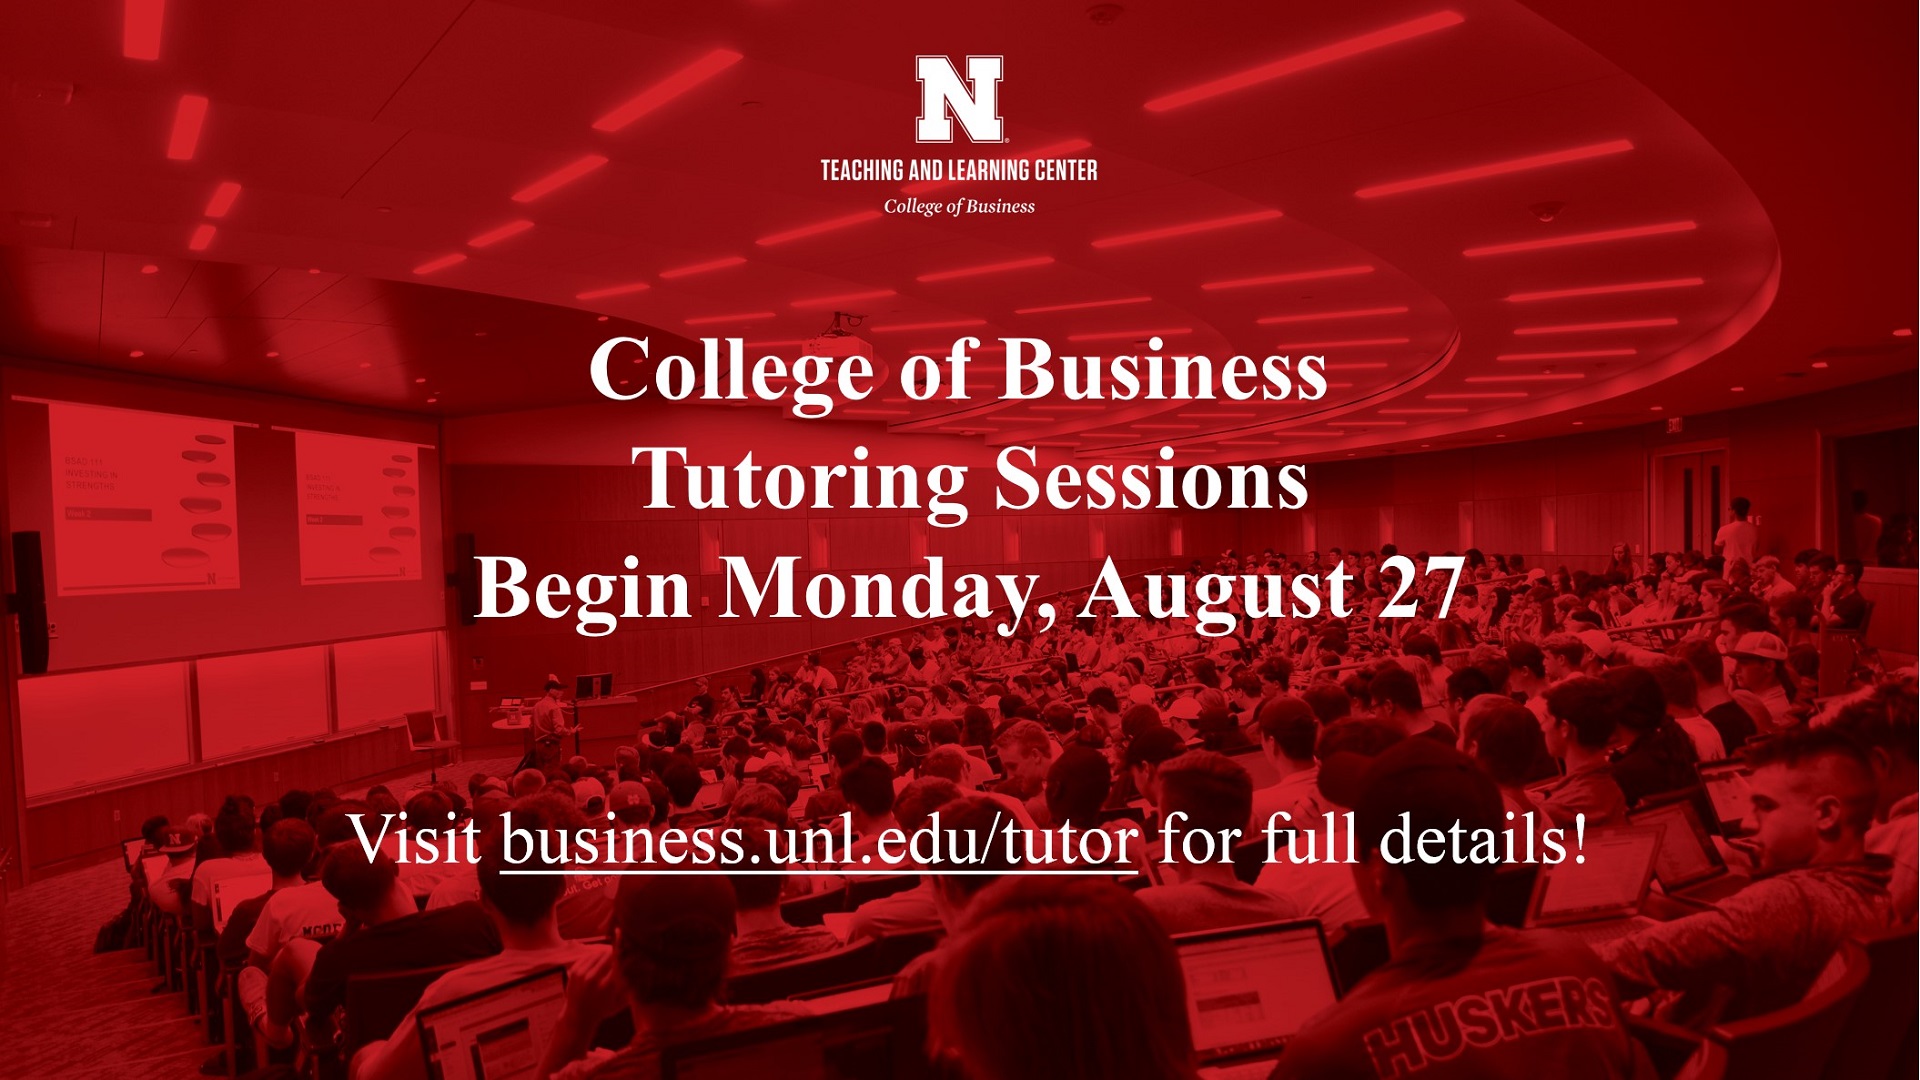 College of Business Tutoring